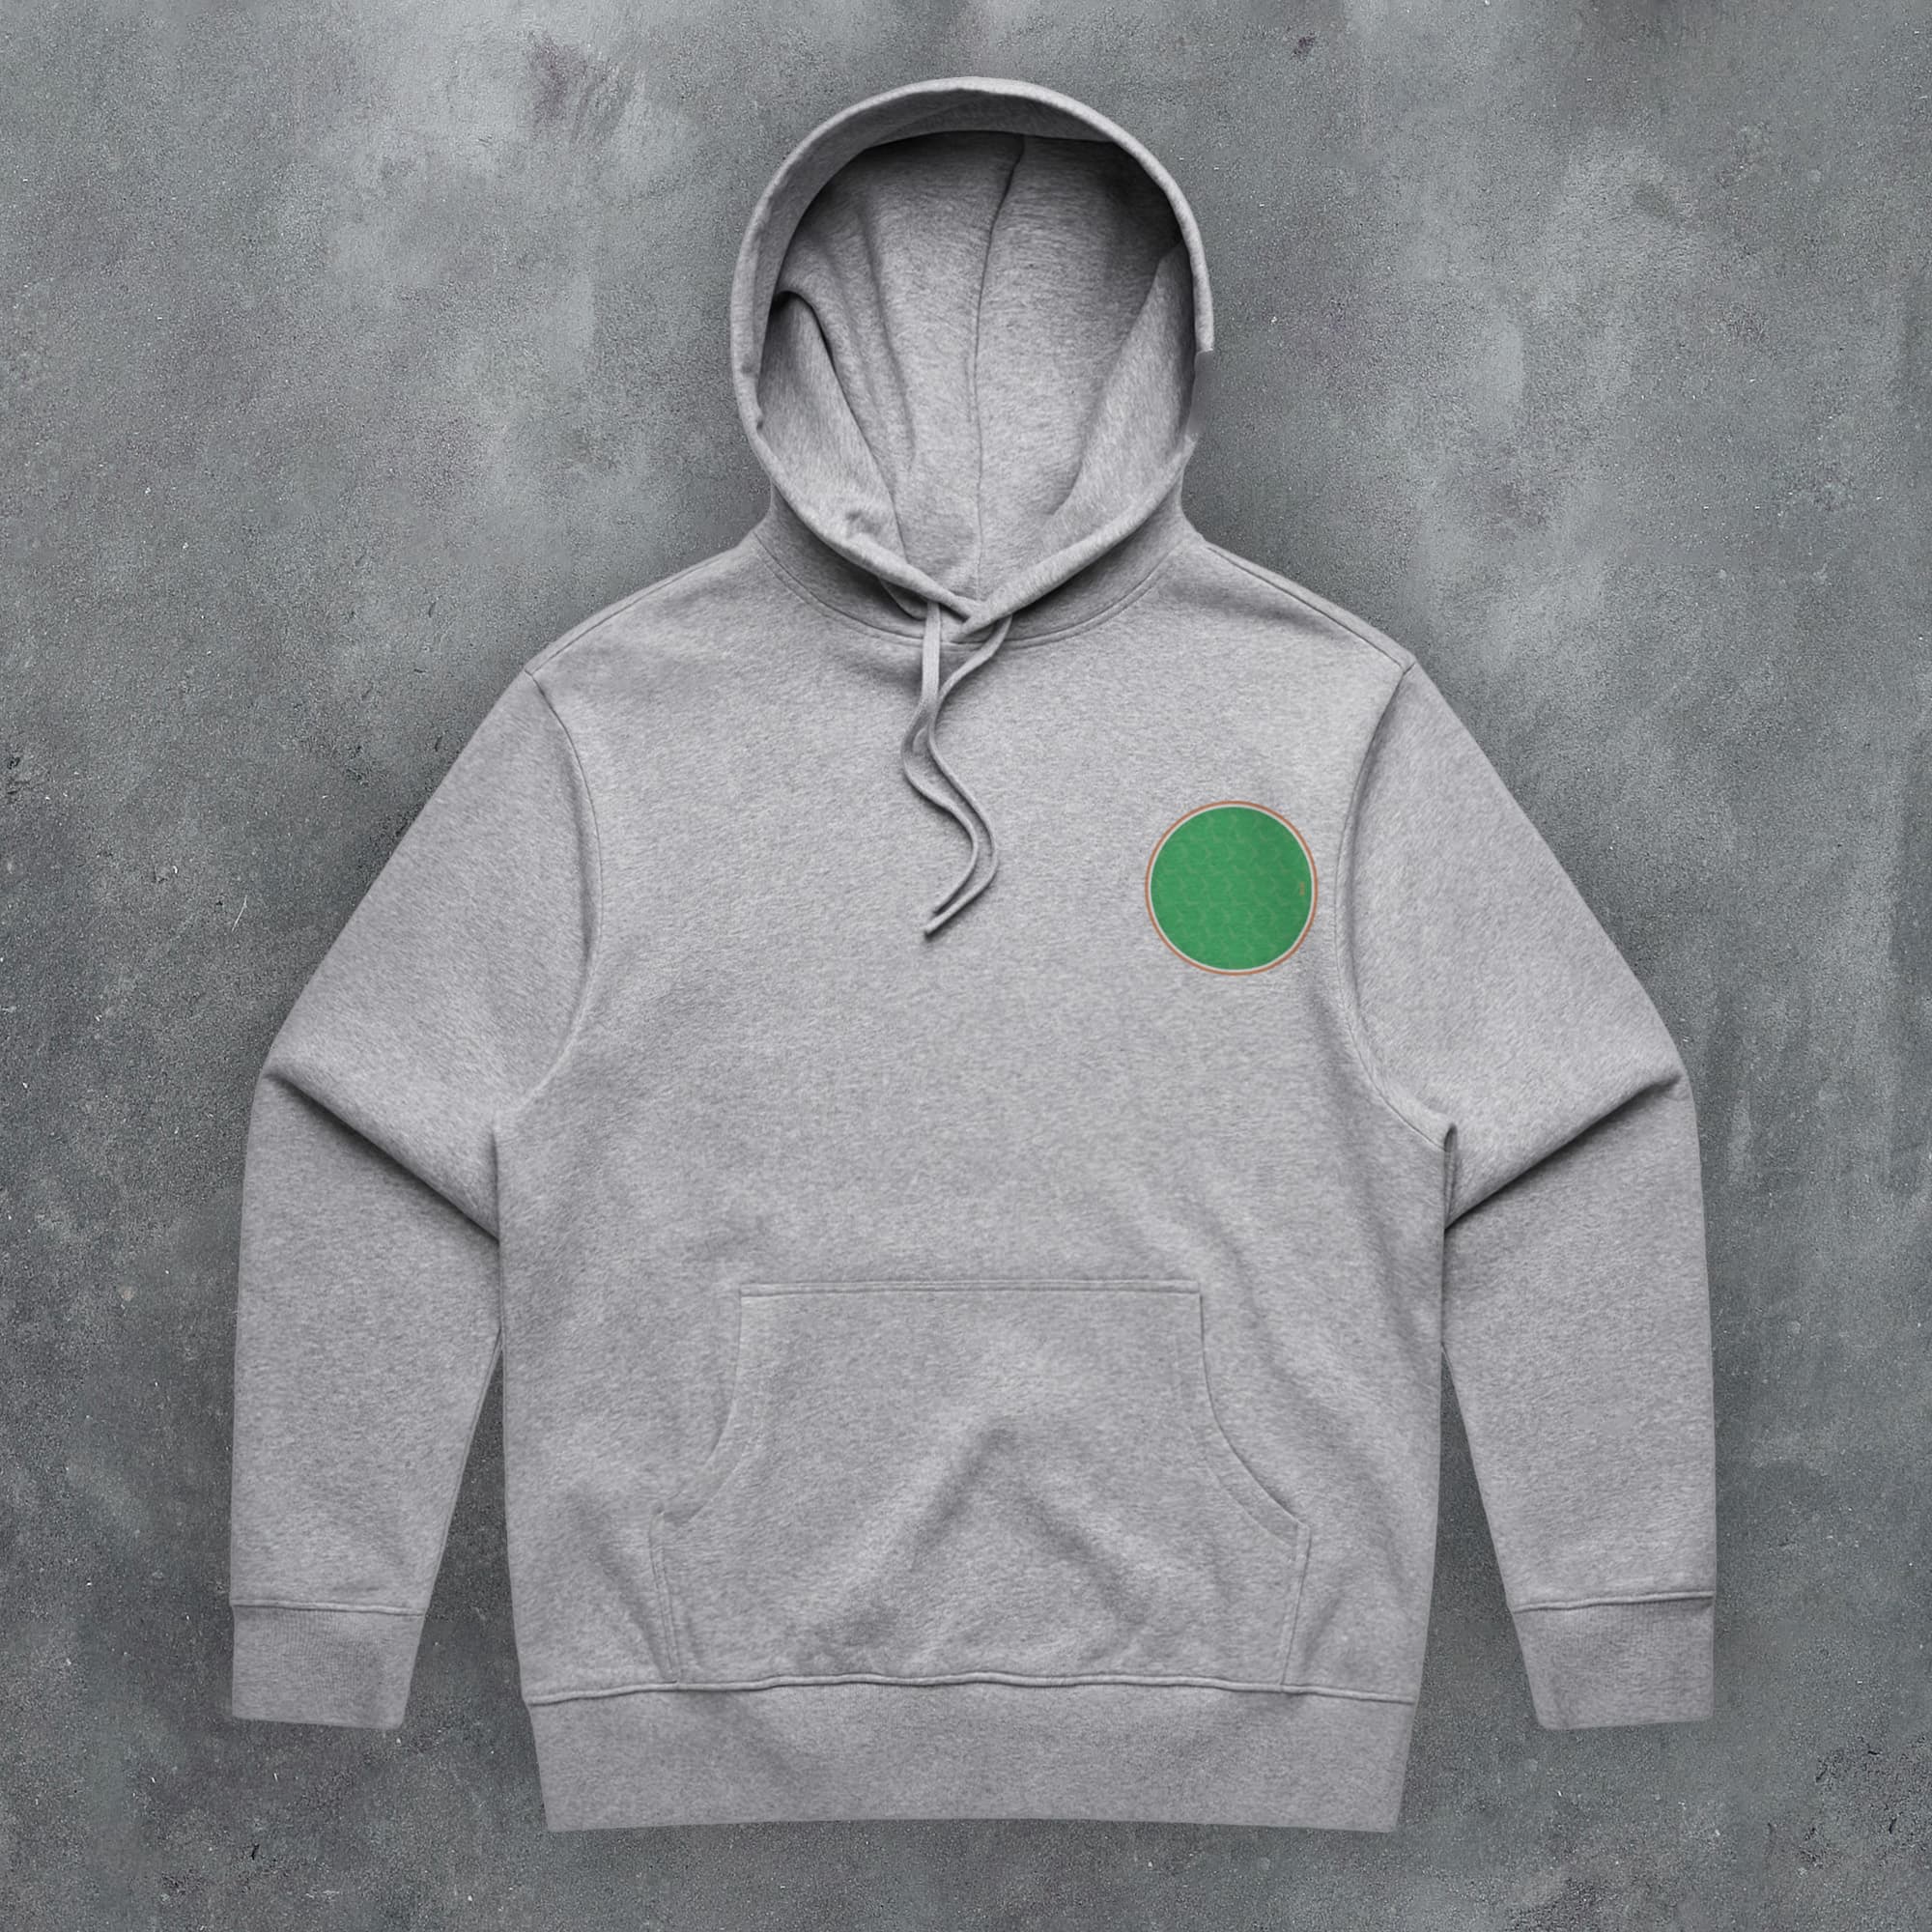 a grey hoodie with a green circle on it